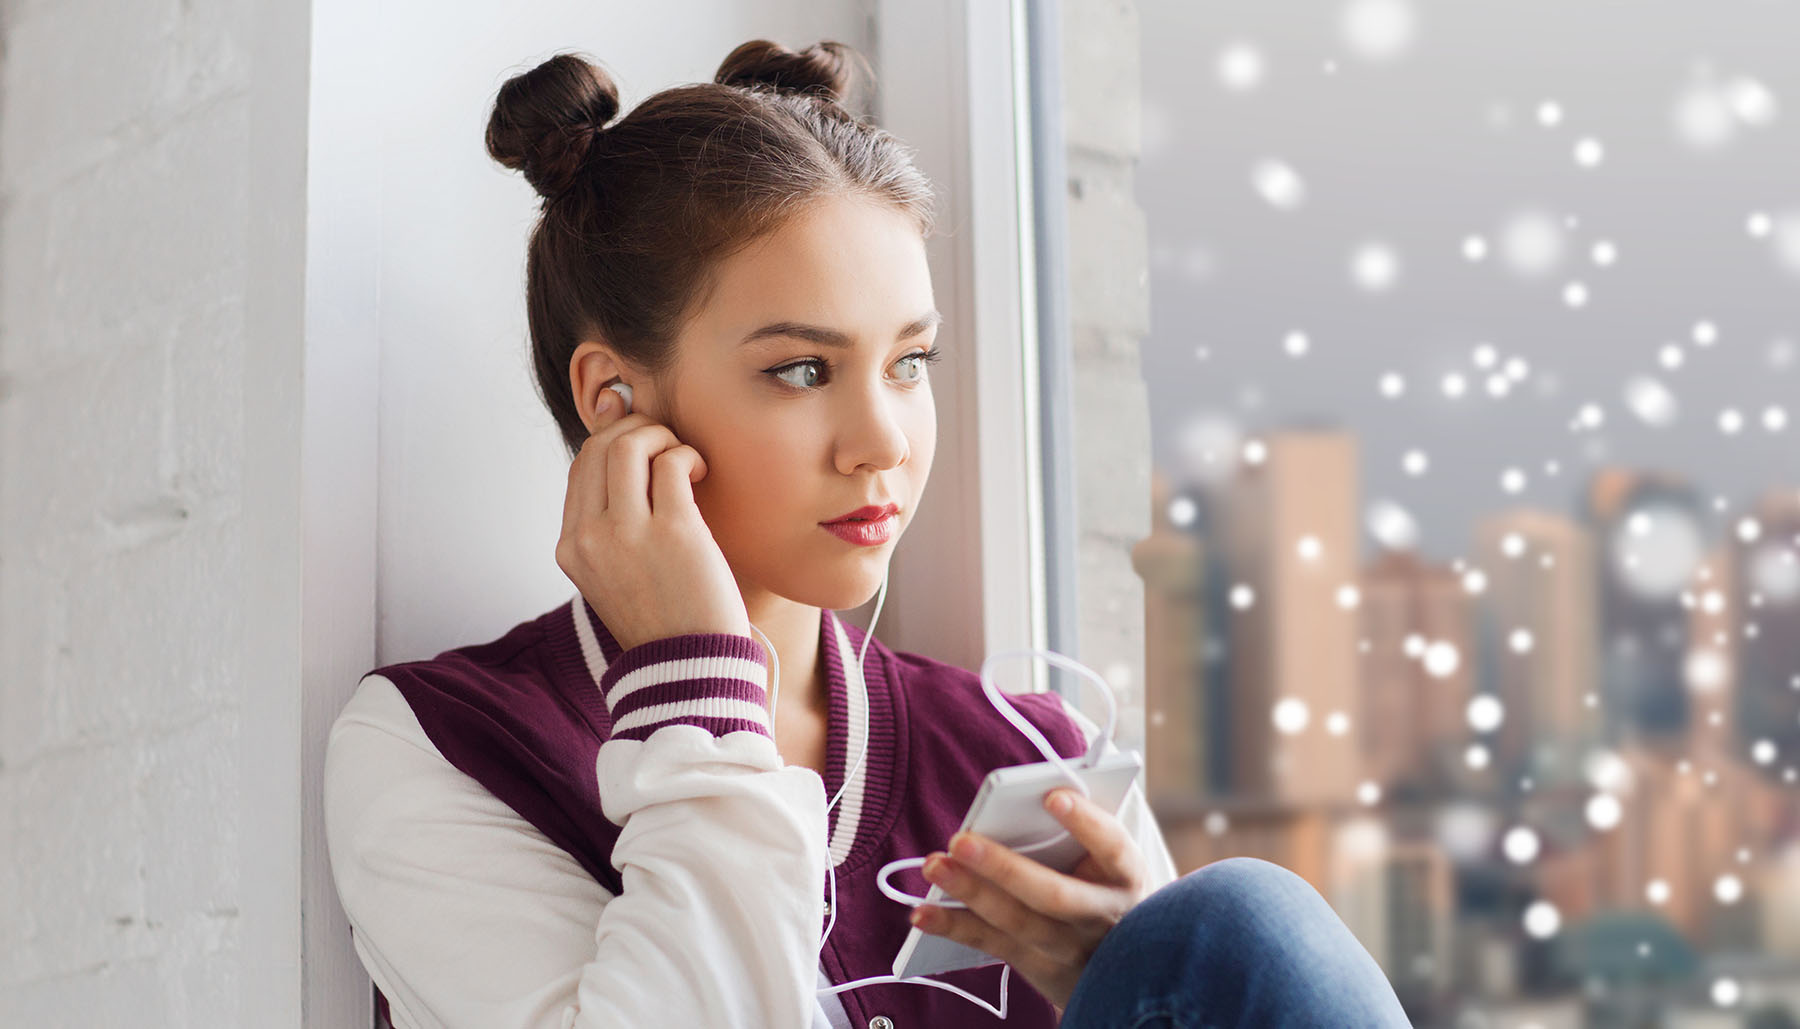 A young woman watching the snow while wearing headphones